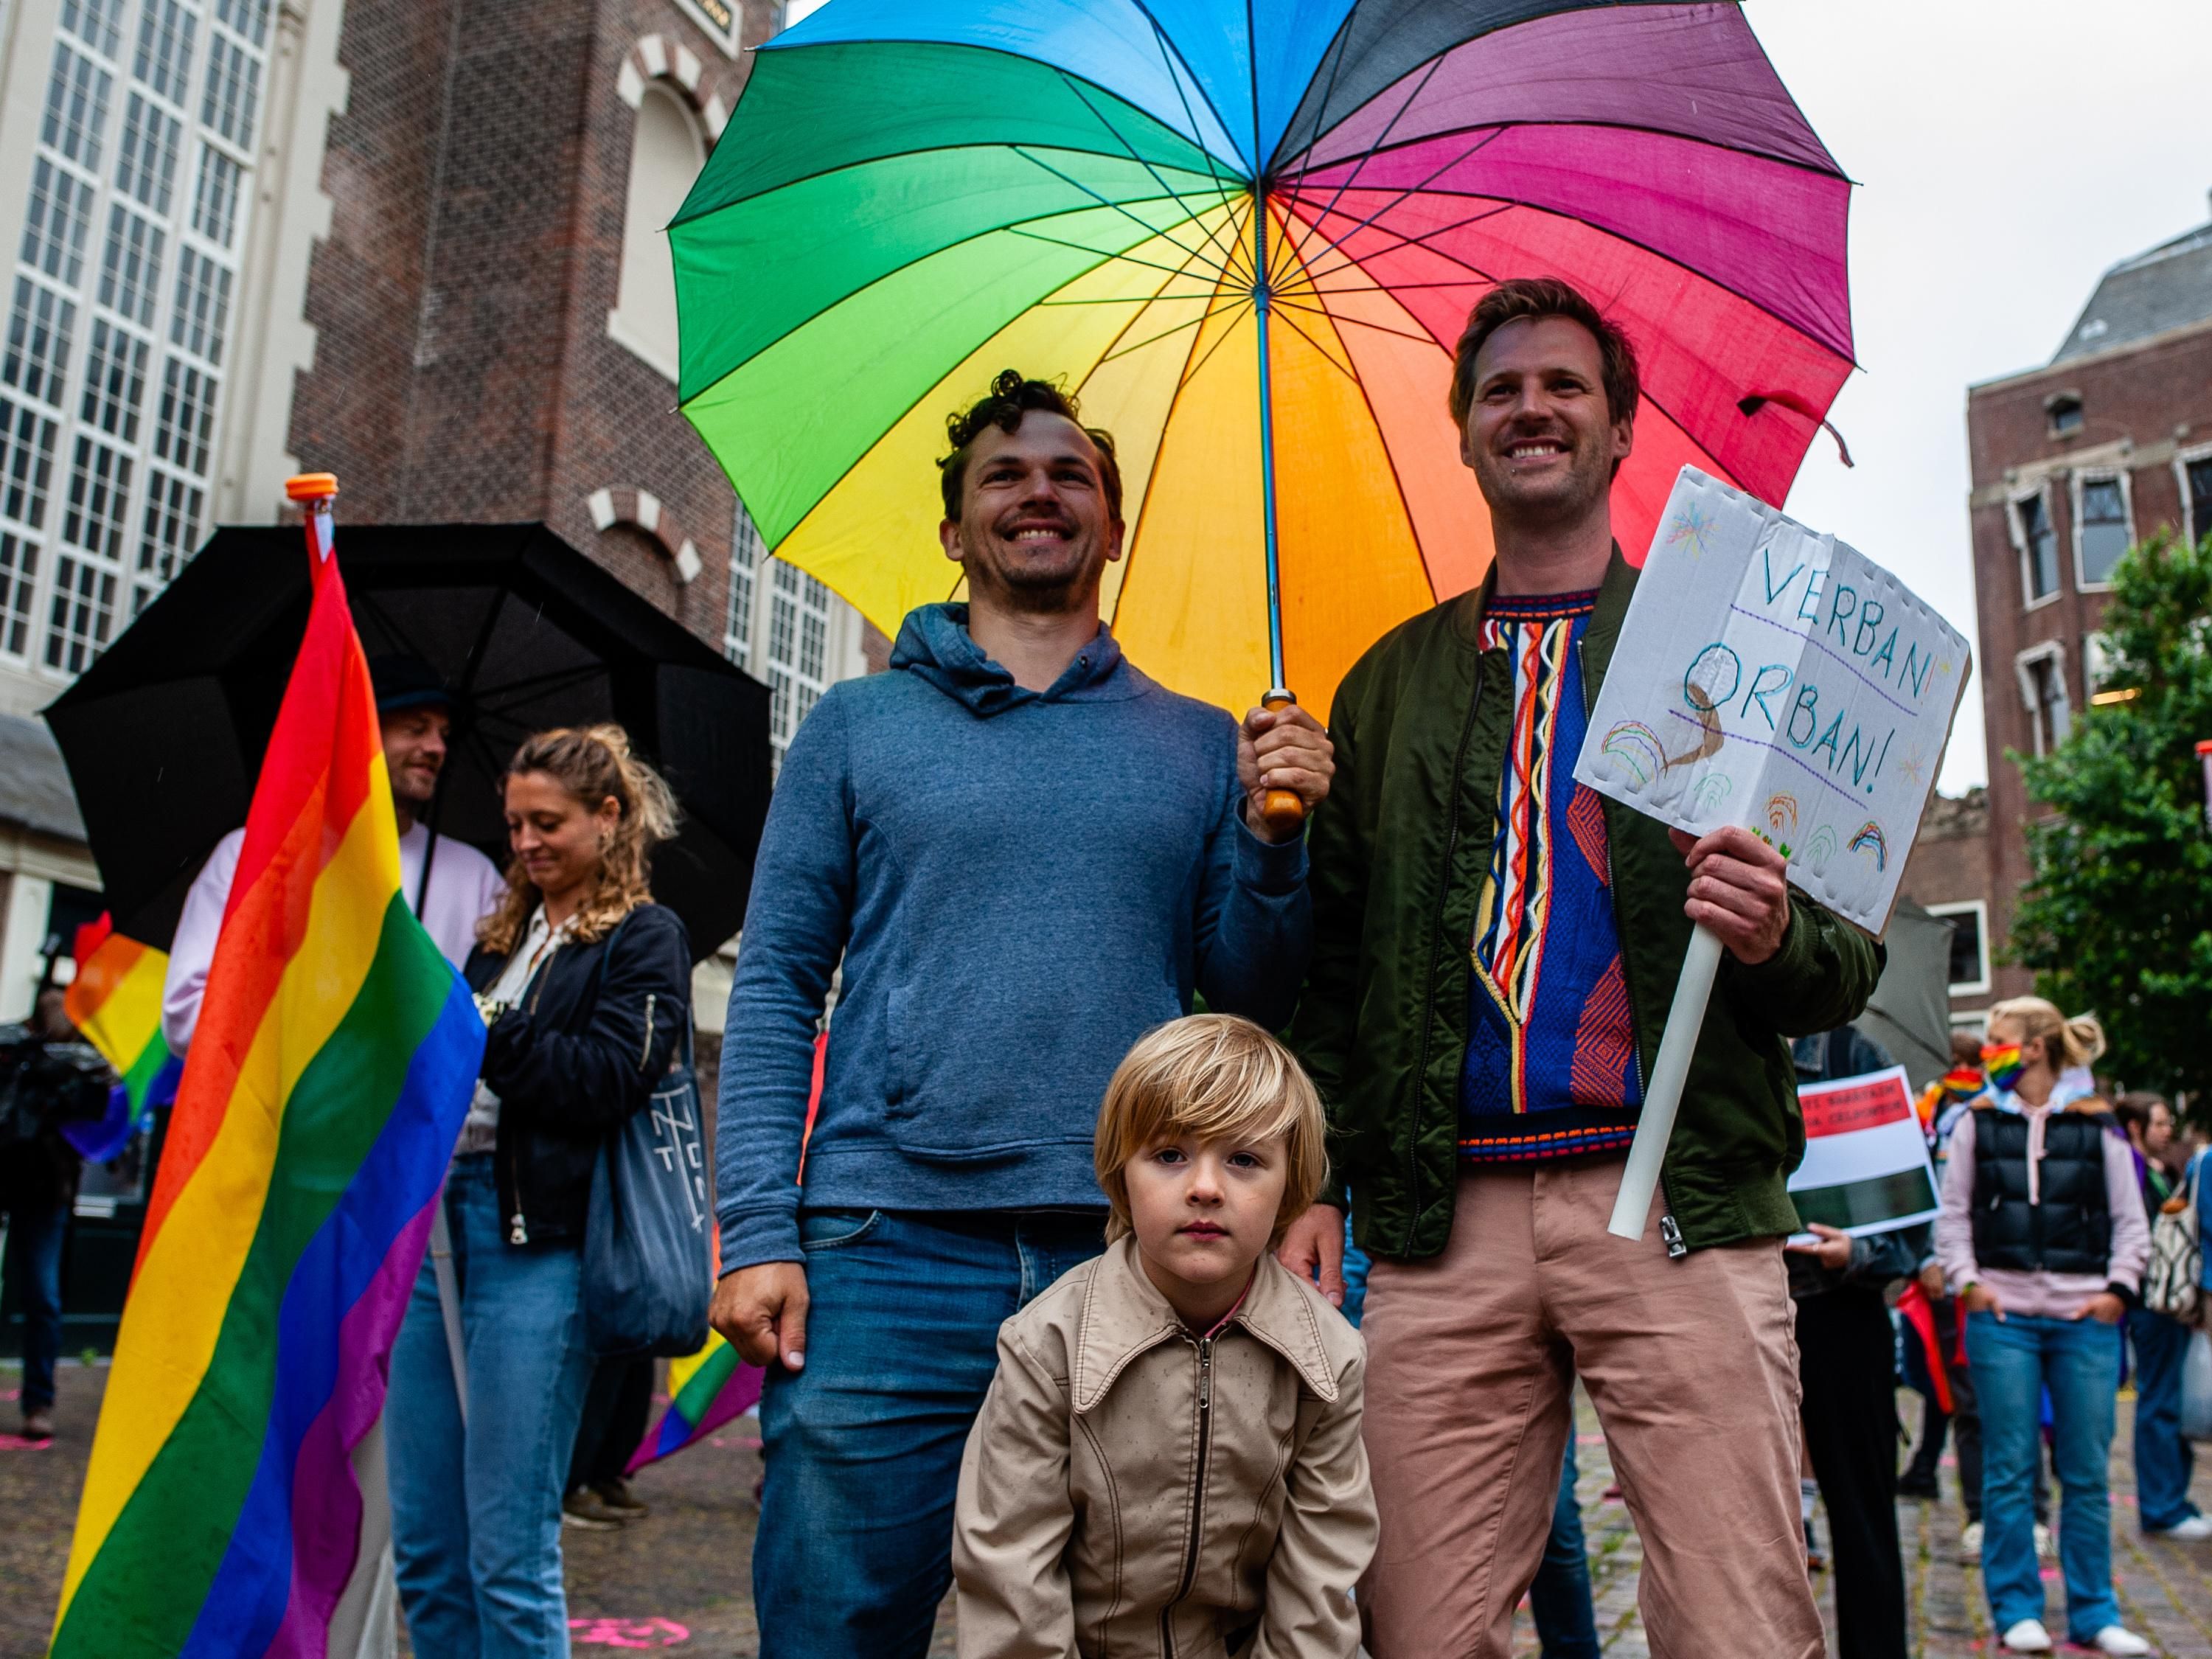 Two fathers with their child at a LGBTQ rights rally in Amsterdam